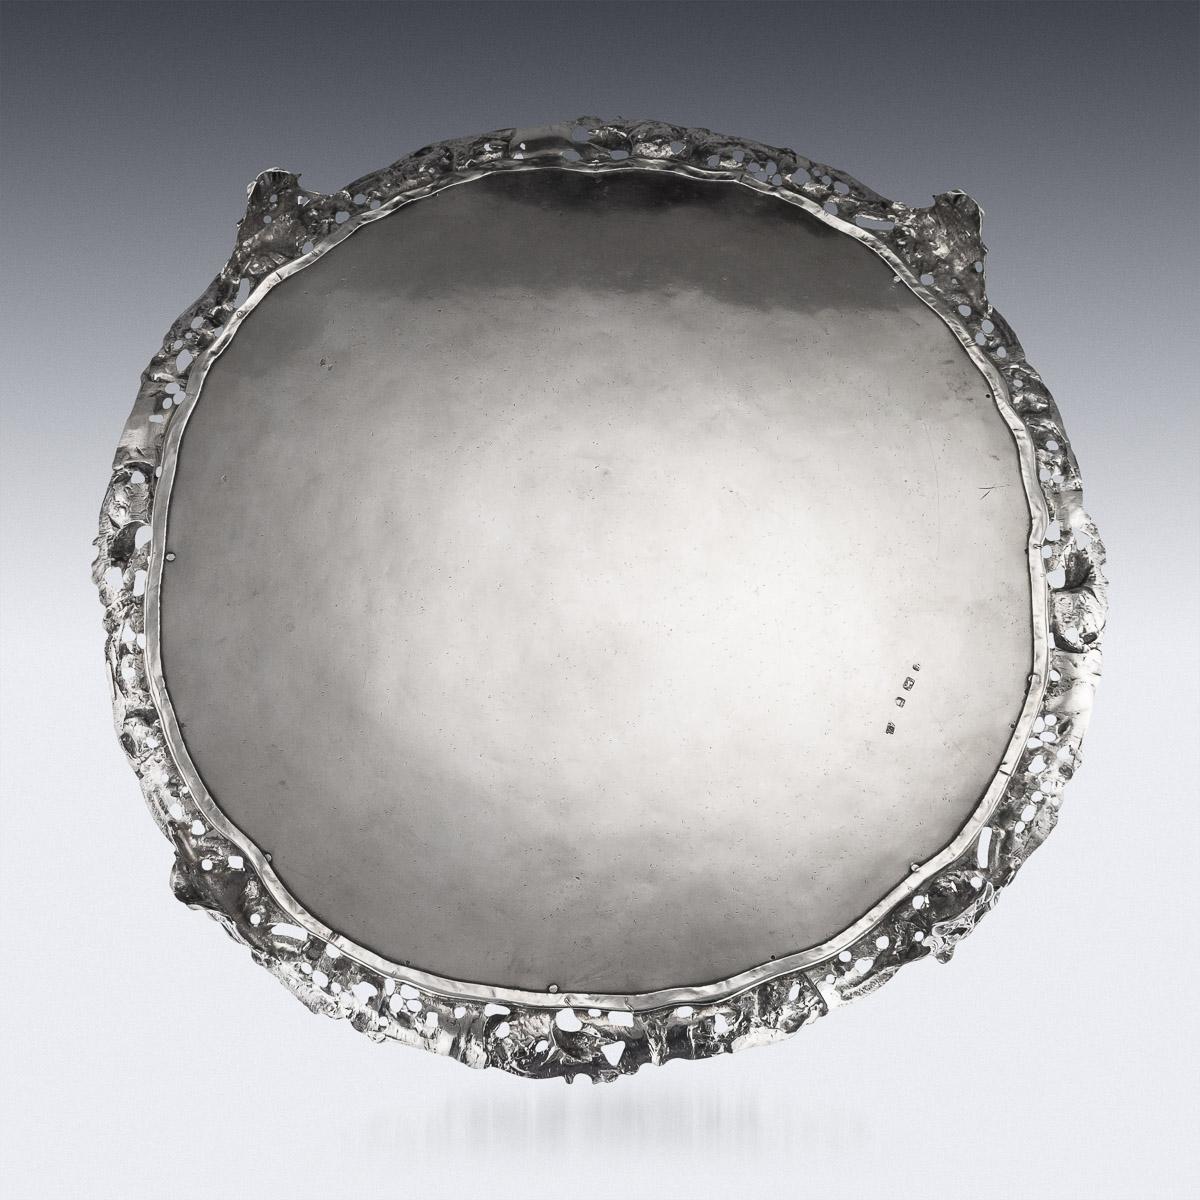 Antique mid-18th century Georgian rare and exceptional solid silver salver with cast border, impressively large size and extremely heavy gauge, of shaped-circular form on four impressive cast scroll feet, with applied cast border depicting female